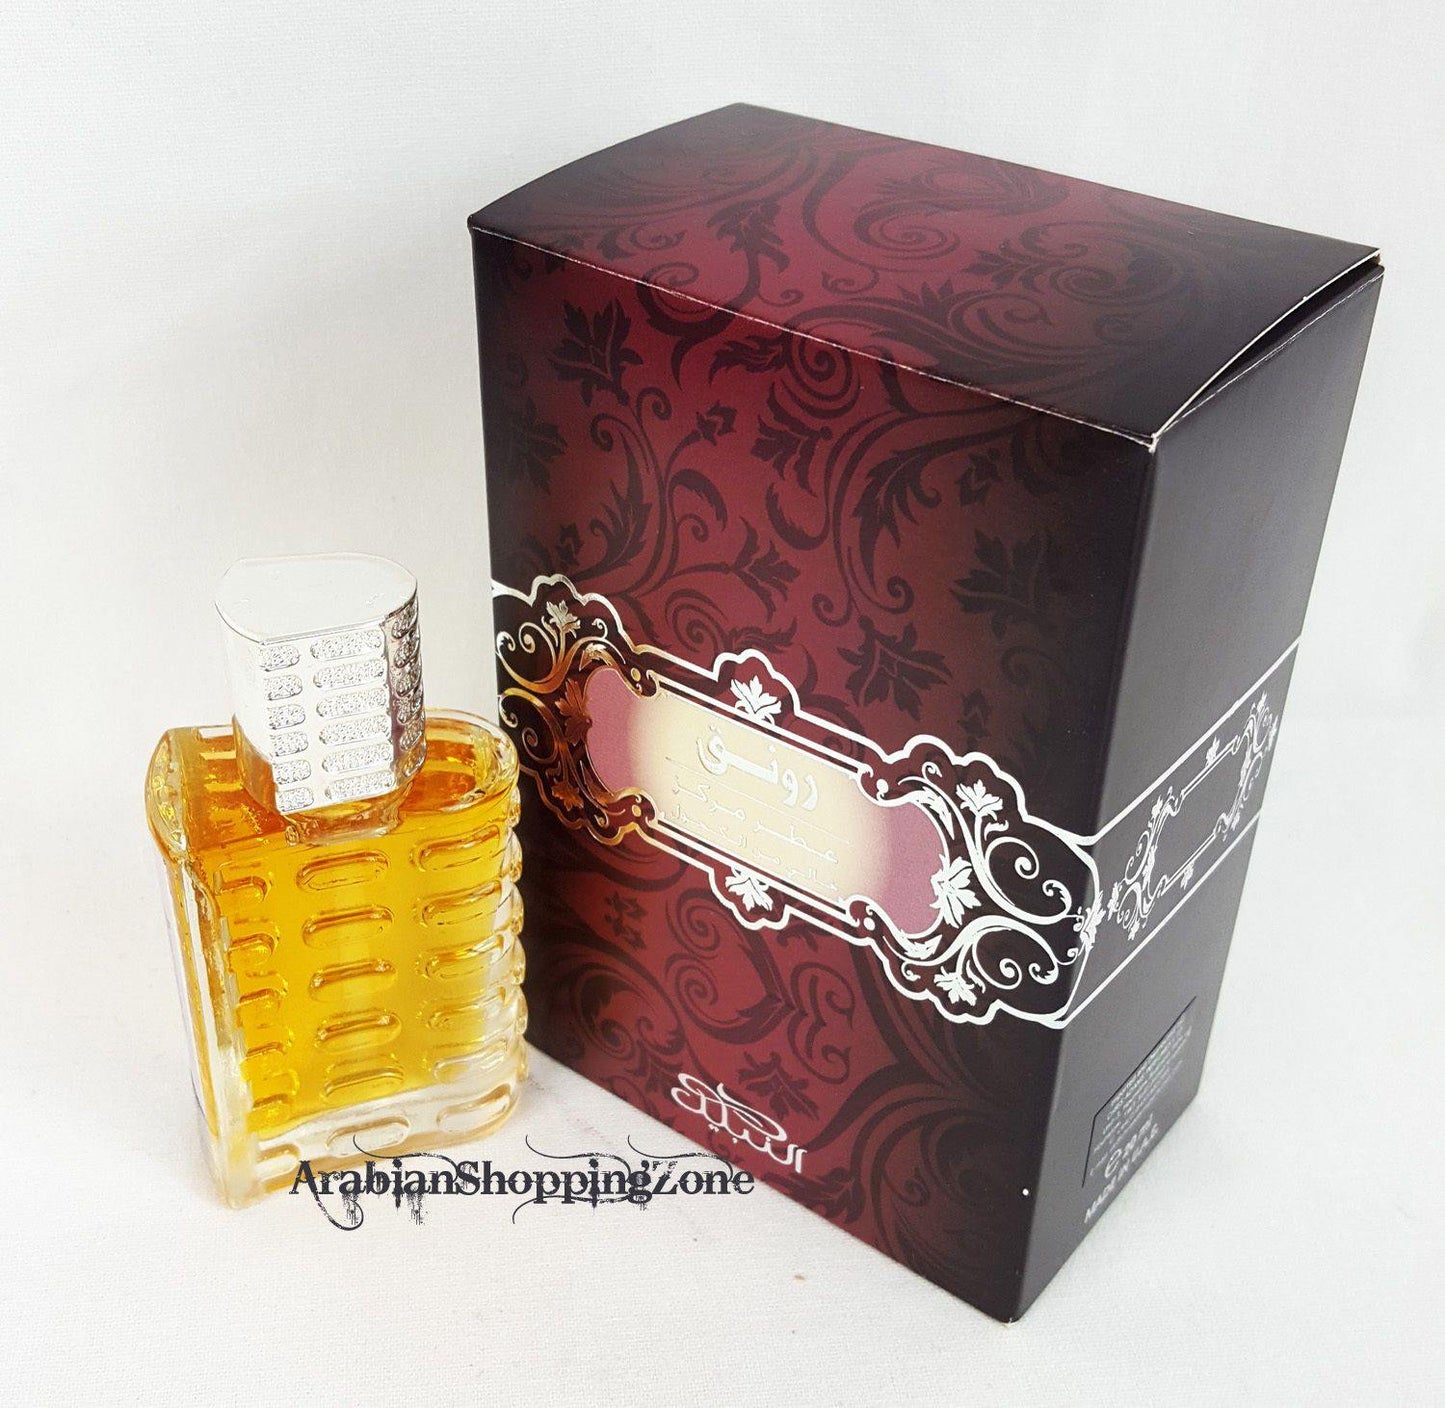 RAUNAQ by Nabeel 20ml Concentrated Oil Perfume Free from Alcohol - Arabian Shopping Zone